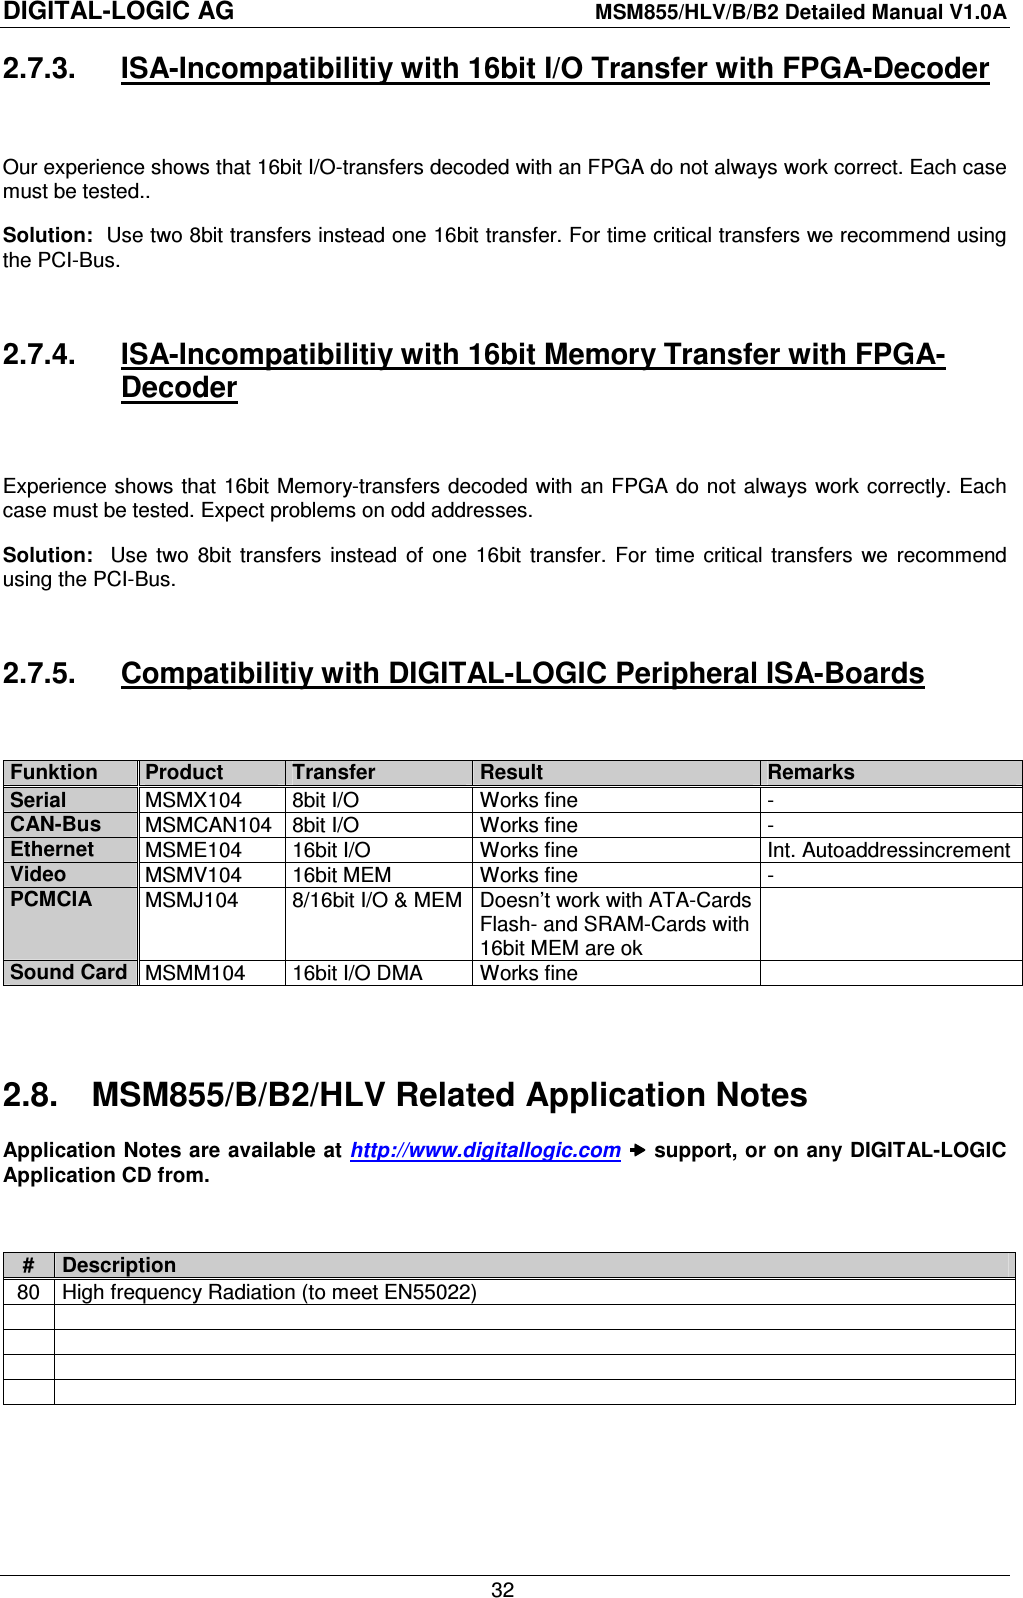 DIGITAL-LOGIC AG    MSM855/HLV/B/B2 Detailed Manual V1.0A    32 2.7.3.  ISA-Incompatibilitiy with 16bit I/O Transfer with FPGA-Decoder  Our experience shows that 16bit I/O-transfers decoded with an FPGA do not always work correct. Each case must be tested.. Solution:  Use two 8bit transfers instead one 16bit transfer. For time critical transfers we recommend using the PCI-Bus.  2.7.4.  ISA-Incompatibilitiy with 16bit Memory Transfer with FPGA-Decoder  Experience shows that 16bit Memory-transfers decoded with an FPGA do not  always  work correctly. Each case must be tested. Expect problems on odd addresses. Solution:    Use  two  8bit  transfers  instead  of  one  16bit  transfer.  For  time  critical  transfers  we  recommend using the PCI-Bus.  2.7.5.  Compatibilitiy with DIGITAL-LOGIC Peripheral ISA-Boards  Funktion  Product  Transfer  Result  Remarks Serial  MSMX104  8bit I/O  Works fine  - CAN-Bus  MSMCAN104  8bit I/O  Works fine  - Ethernet  MSME104  16bit I/O  Works fine  Int. Autoaddressincrement Video  MSMV104  16bit MEM  Works fine  - PCMCIA  MSMJ104  8/16bit I/O &amp; MEM Doesn’t work with ATA-Cards Flash- and SRAM-Cards with 16bit MEM are ok  Sound Card MSMM104  16bit I/O DMA  Works fine     2.8.  MSM855/B/B2/HLV Related Application Notes Application Notes are available at http://www.digitallogic.com  support, or on any DIGITAL-LOGIC Application CD from.  #  Description 80  High frequency Radiation (to meet EN55022)               